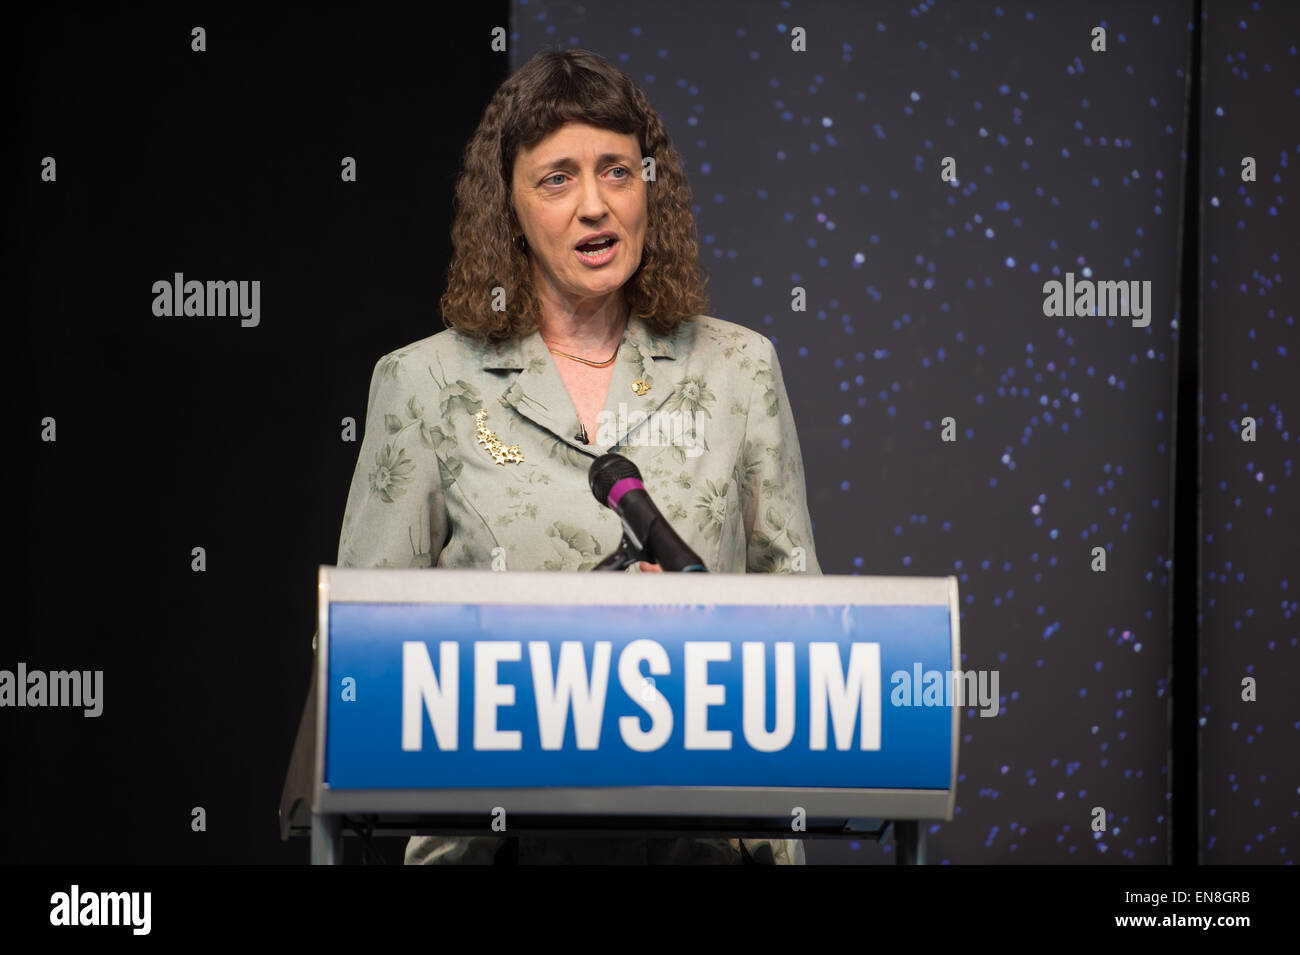 Dr. Jennifer J Wiseman, senior project scientist for the Hubble Space Telescope, NASA, speaks at the Hubble 25th Anniversary official image debut event on Thursday, April 23, 2015 at the Newseum in Washington, DC. The official image from Hubble's near-infrared Wide Field Camera 3 is of a two million year old cluster of about 3,000 stars called Westerlund 2, named after the astronomer who discovered it in the 1960s. Westerlund 2 is located in the constellation Carina about 20,000 light-years away from Earth. Stock Photo